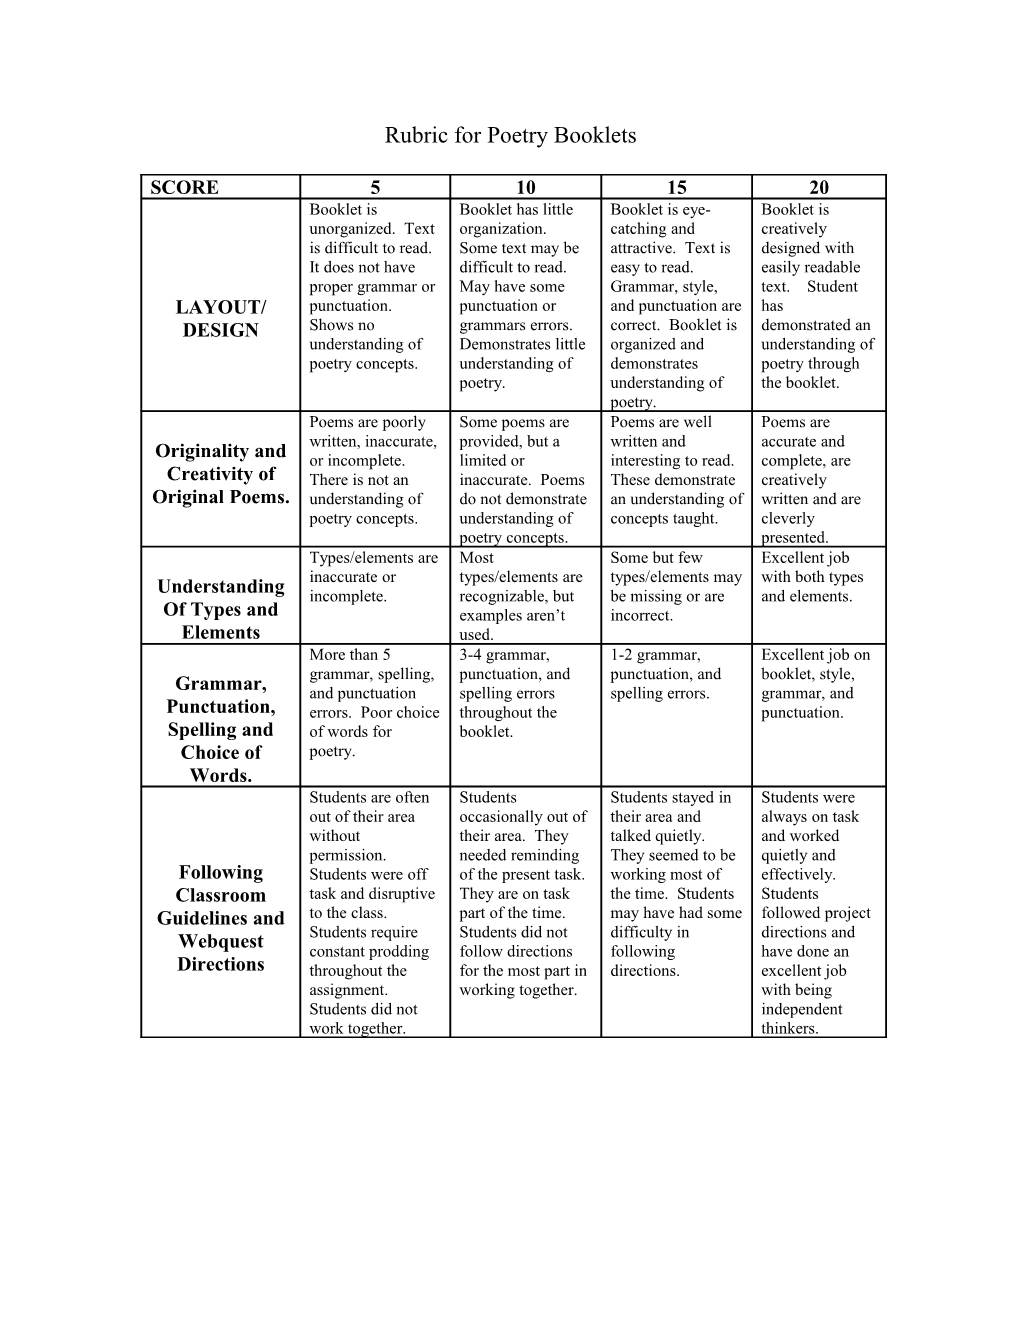 Rubric for Poetry Booklets